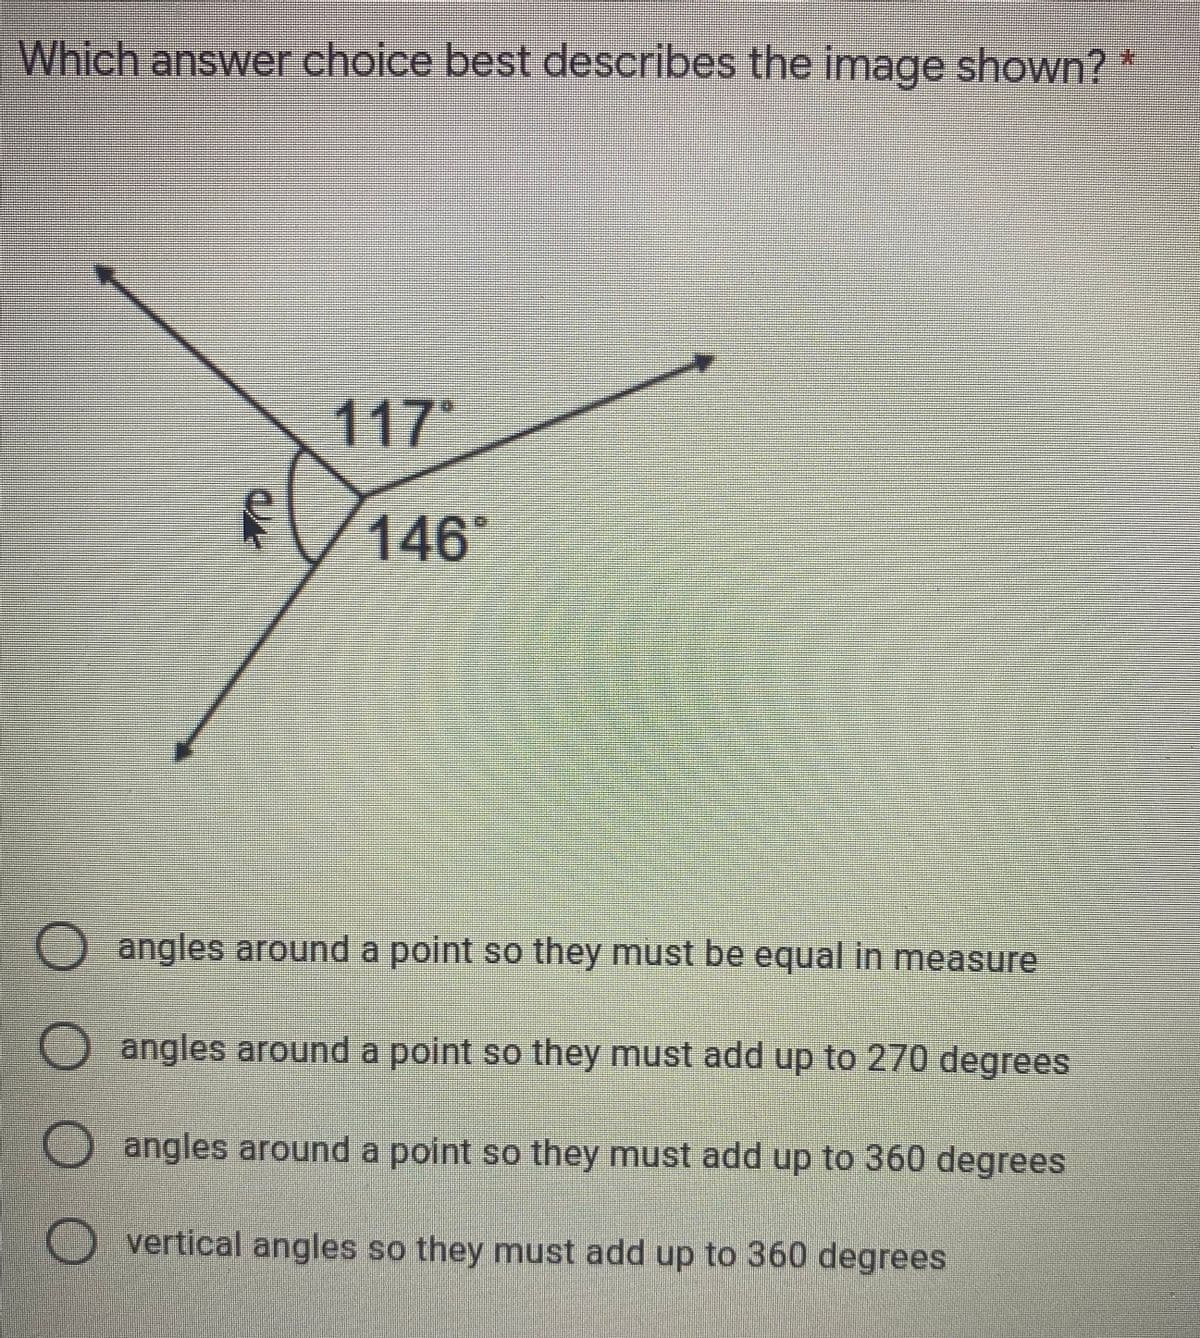 Which answer choice best describes the image shown? *
117"
sV146
O angles around a point so they must be equal in measure
angles around a point so they must add up to 270 degrees
O angles around a point so they must add up to 360 degrees
vertical angles so they must add up to 360 degrees
